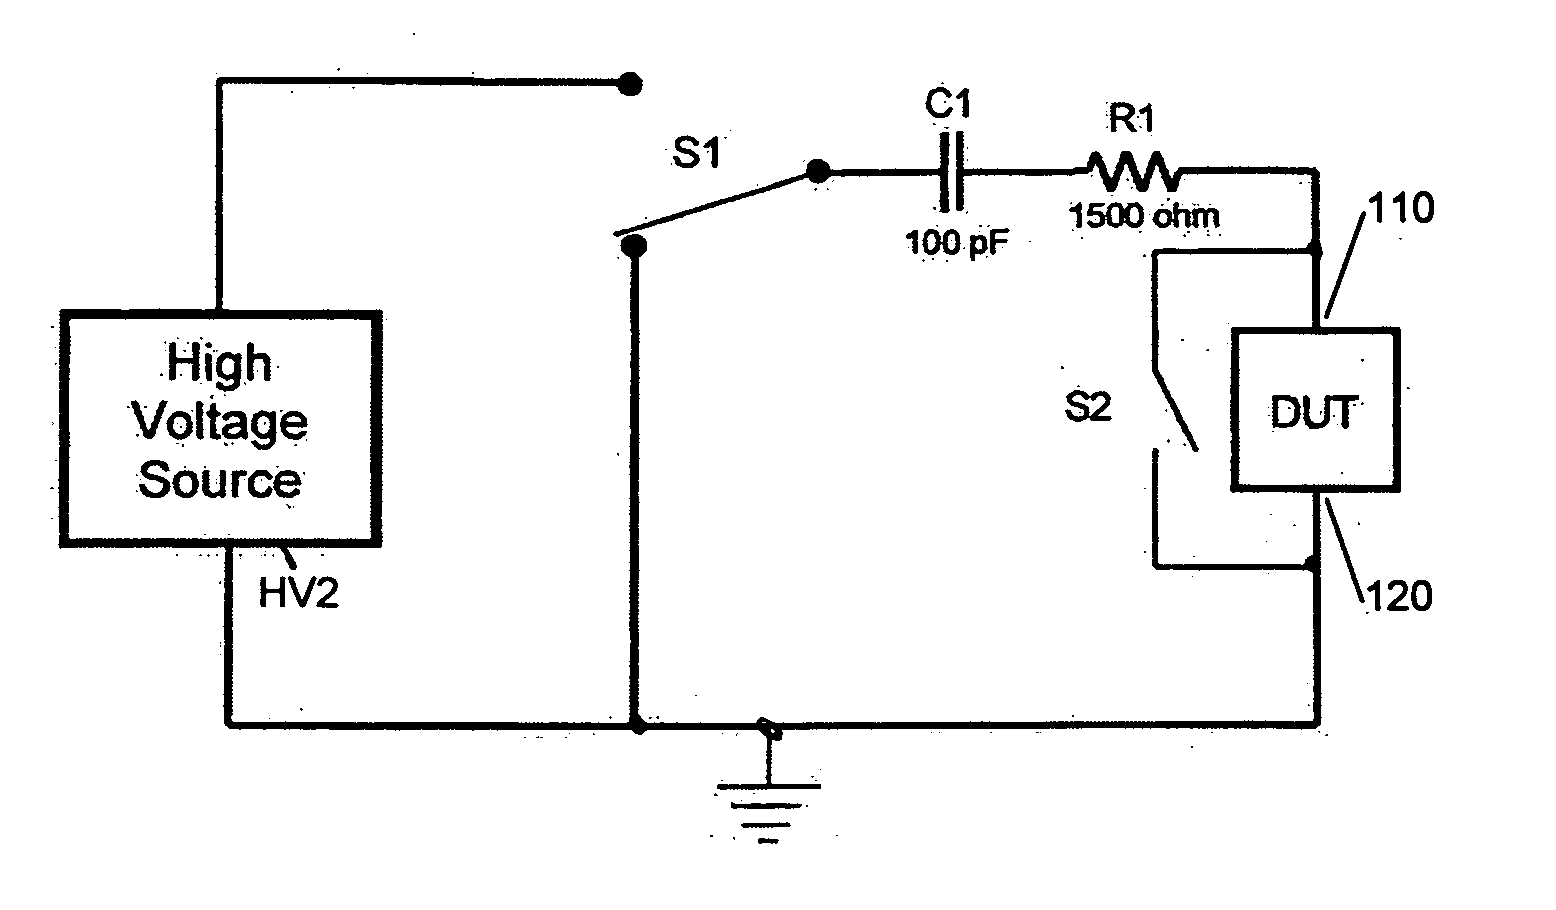 Circuit for minimizing or eliminating pulse anomalies in human body model electrostatic discharge tests